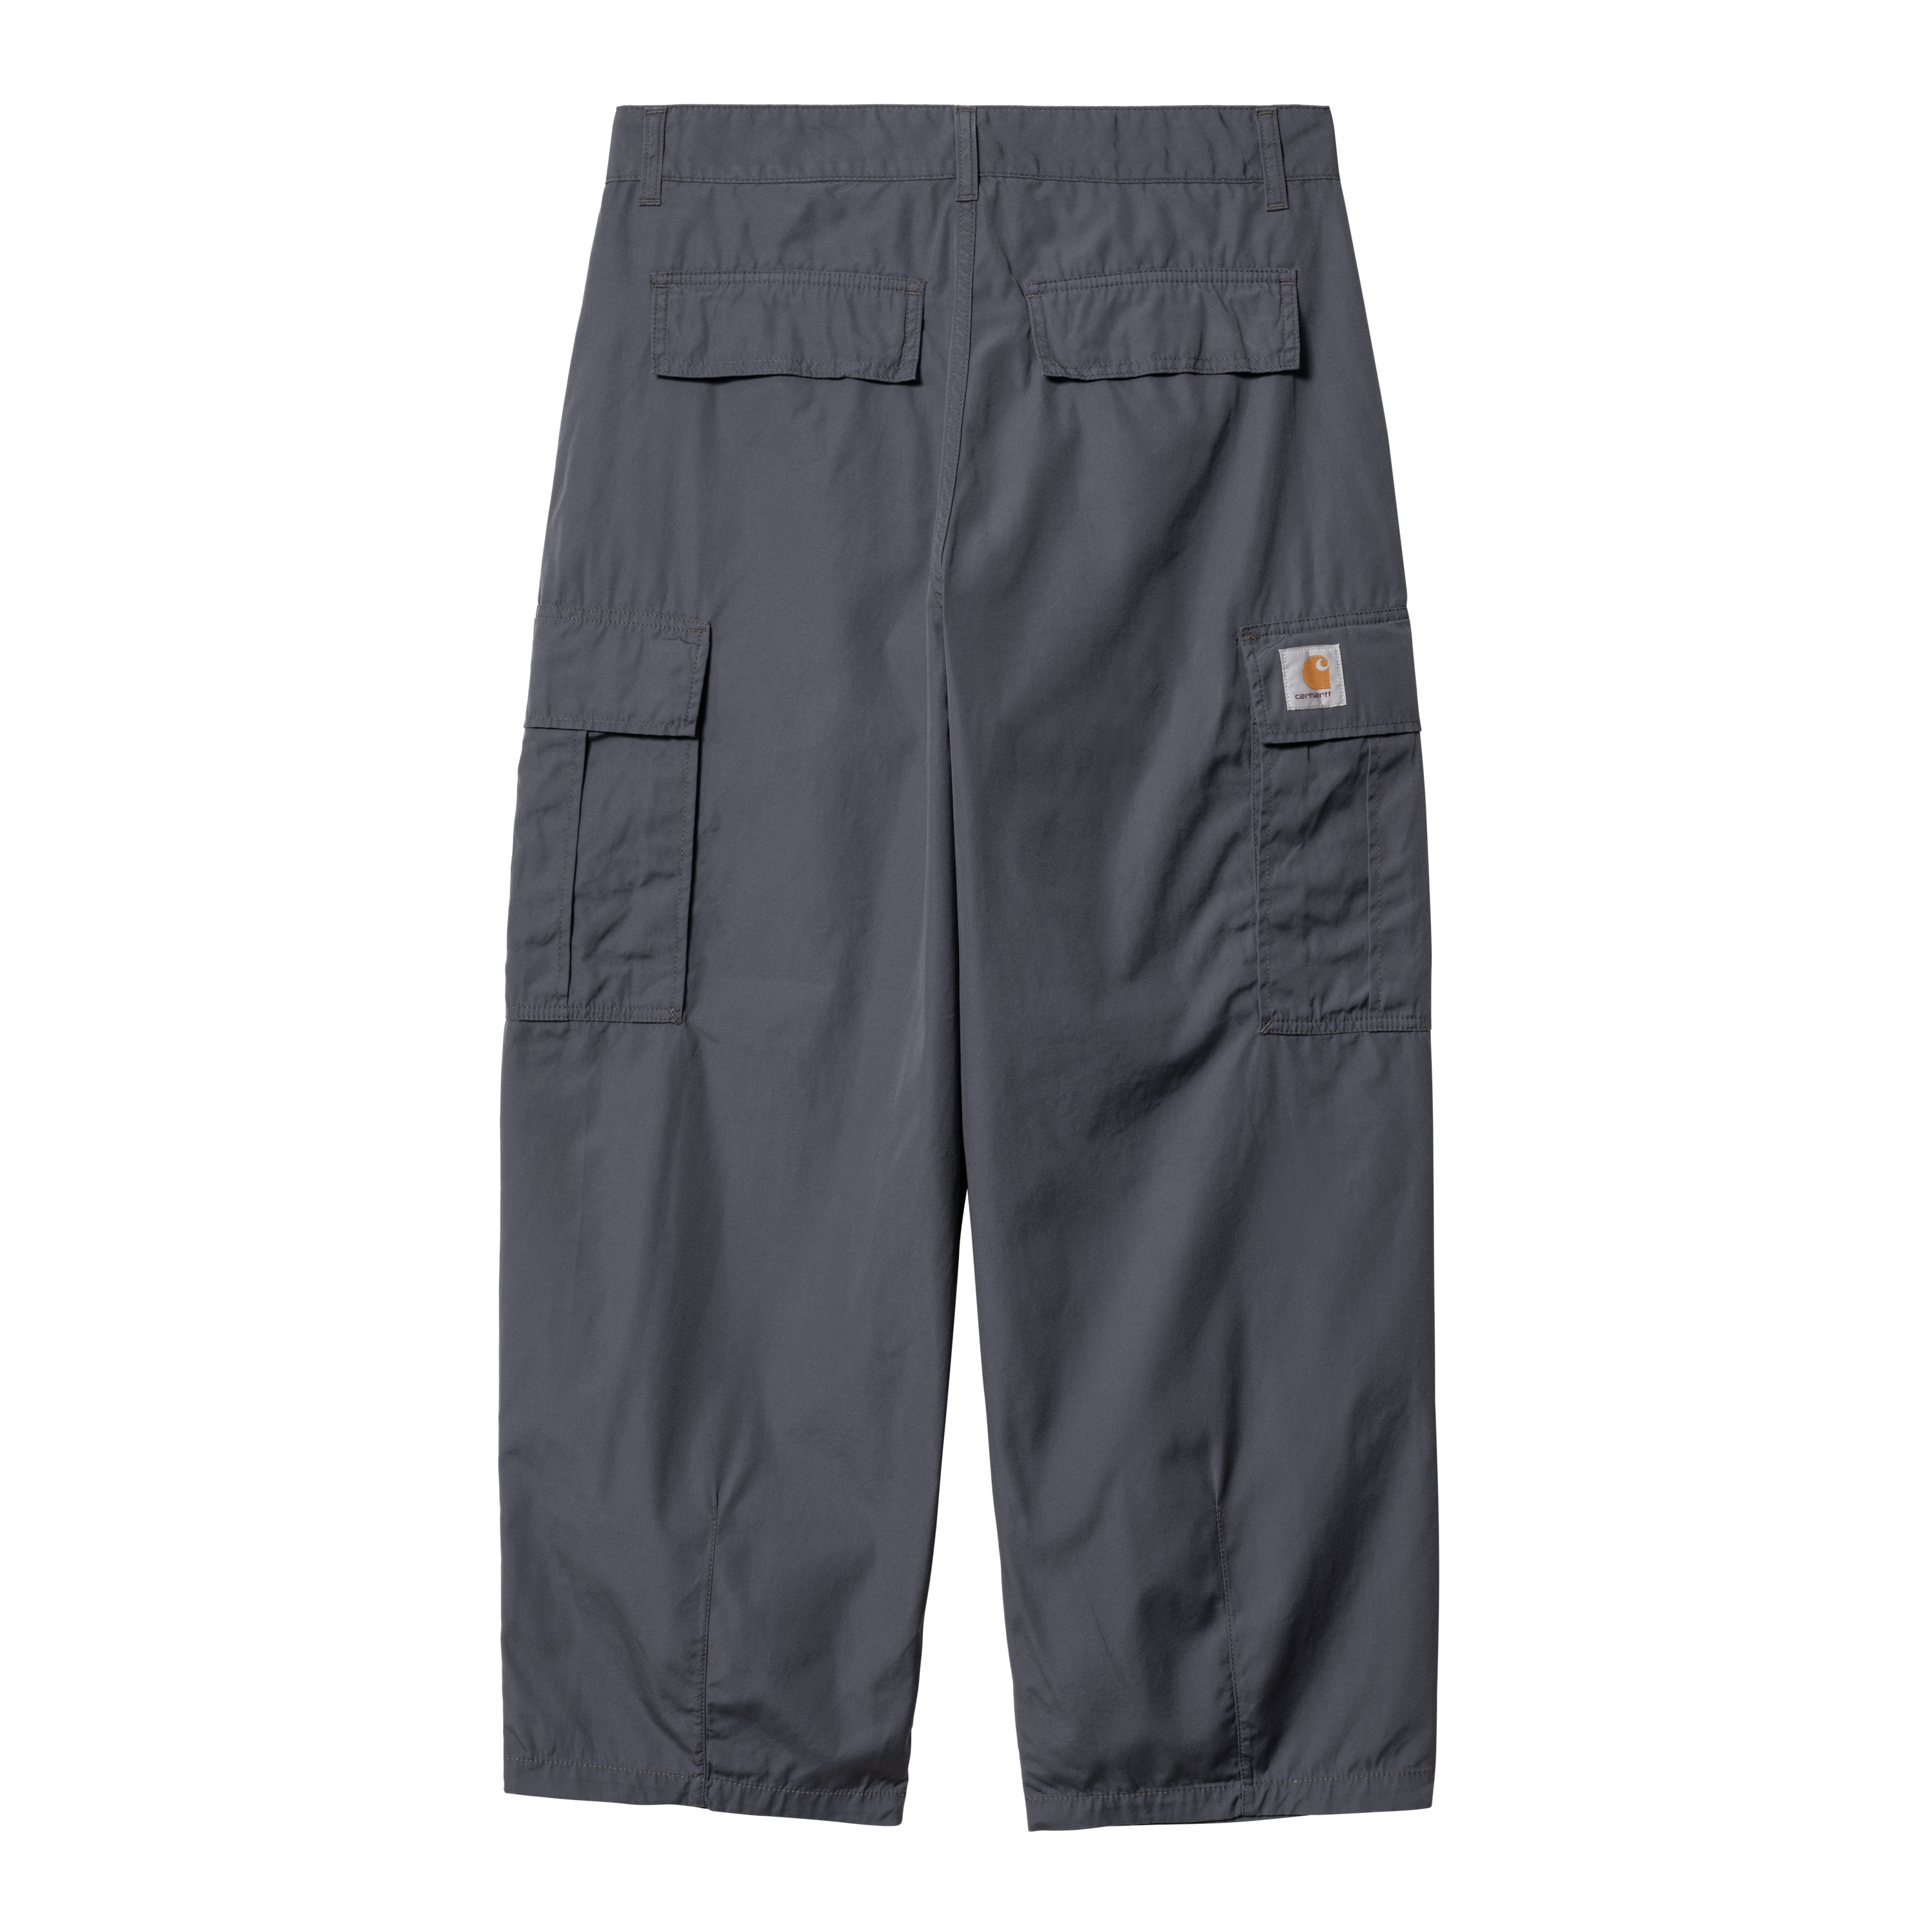 https://cdn.media.amplience.net/i/carhartt_wip/I030477_1CQ_02-ST-01/cole-cargo-pant-zeus-rinsed-1839.png?$pdp_01_mobile$